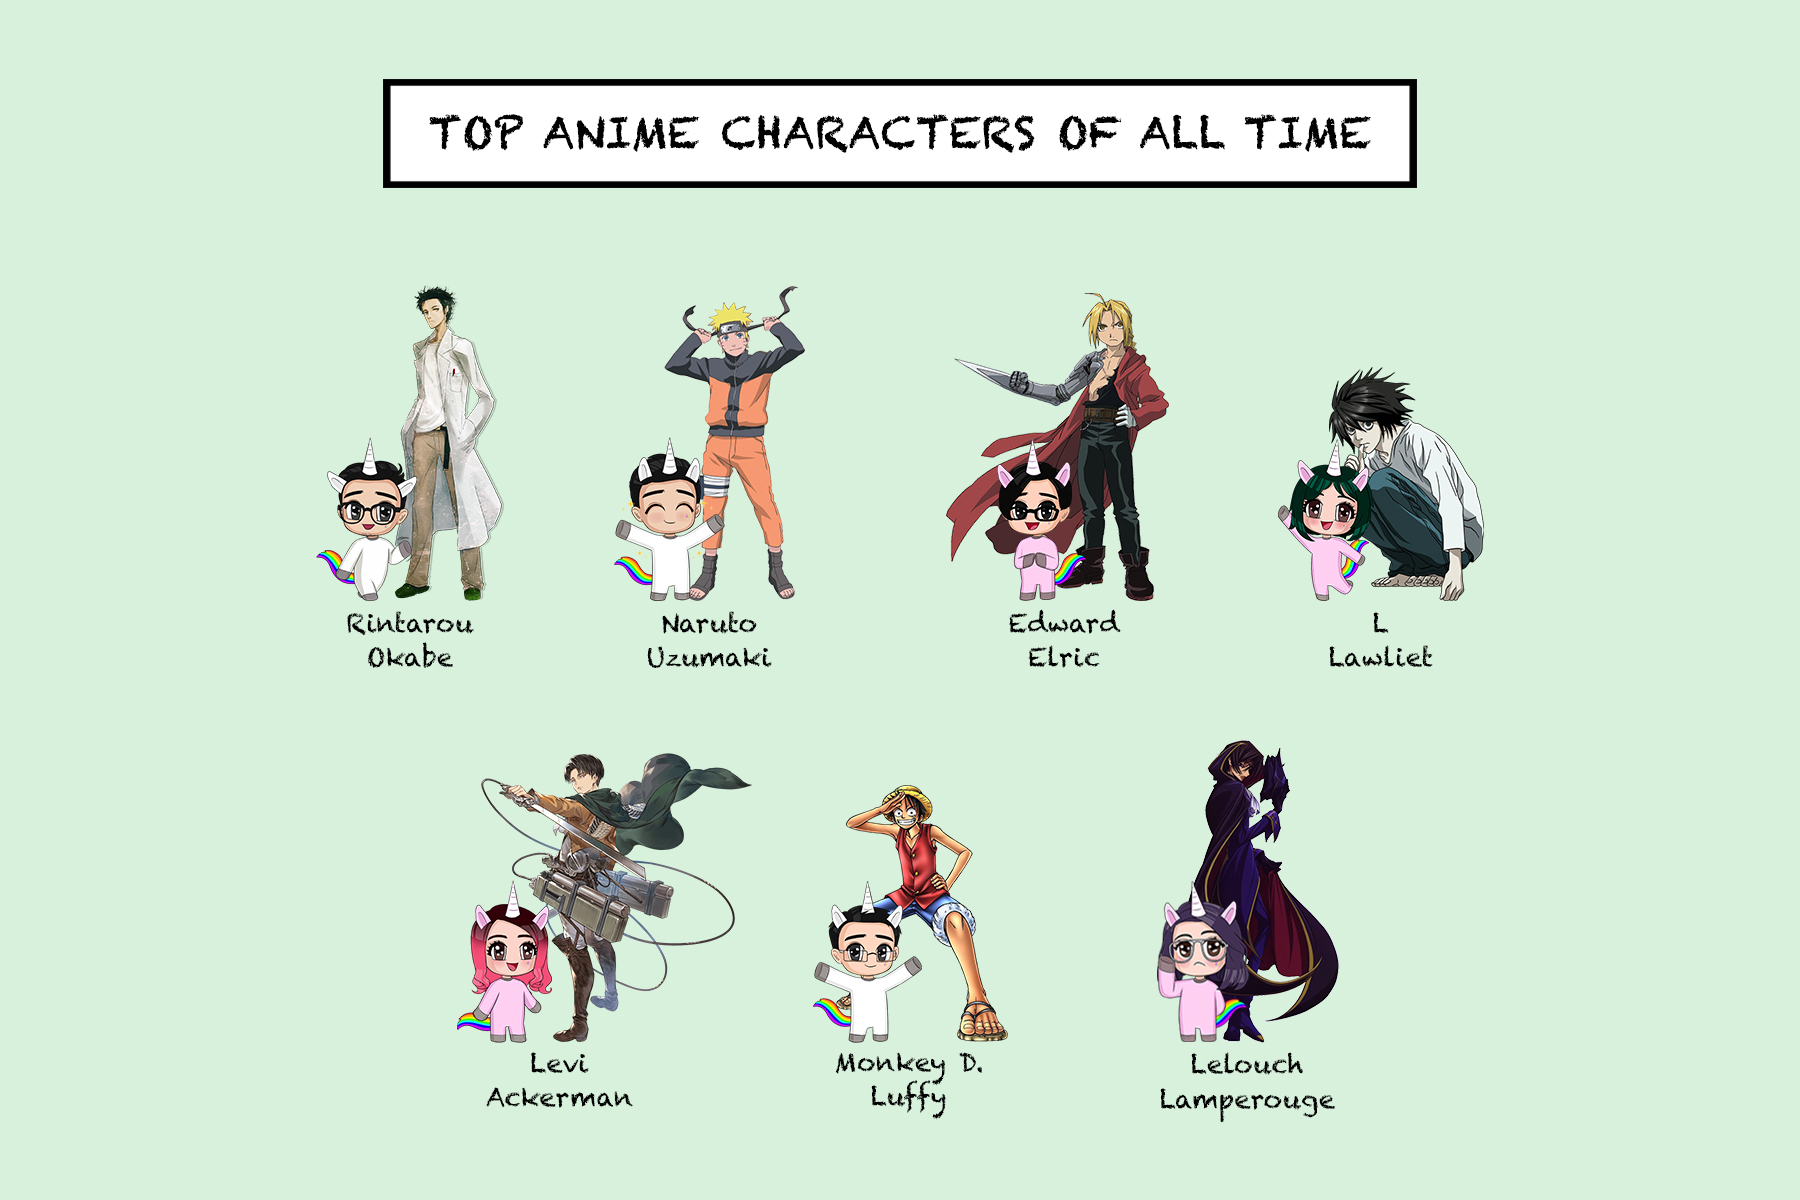 Top anime characters of all time | People's Inc.